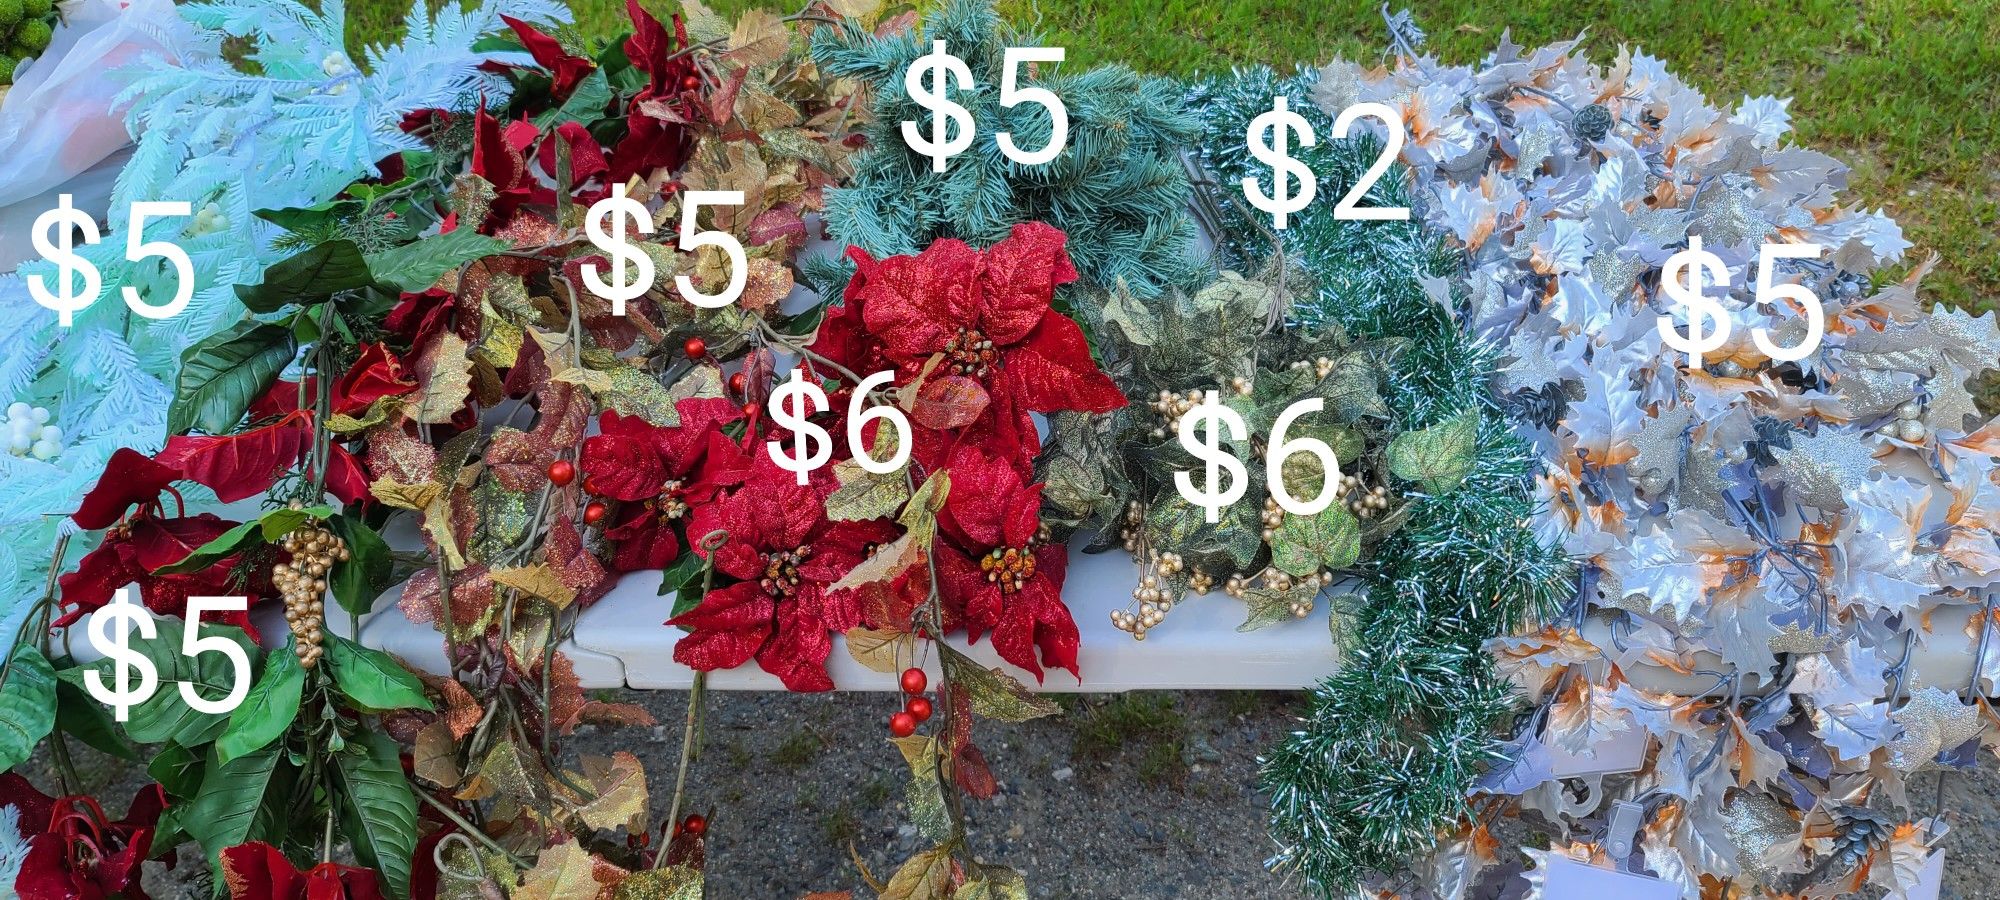 Garlands Tons Of Christmas, Flower Stems, Picks Branches, Swag, Poinsettia Leafs,